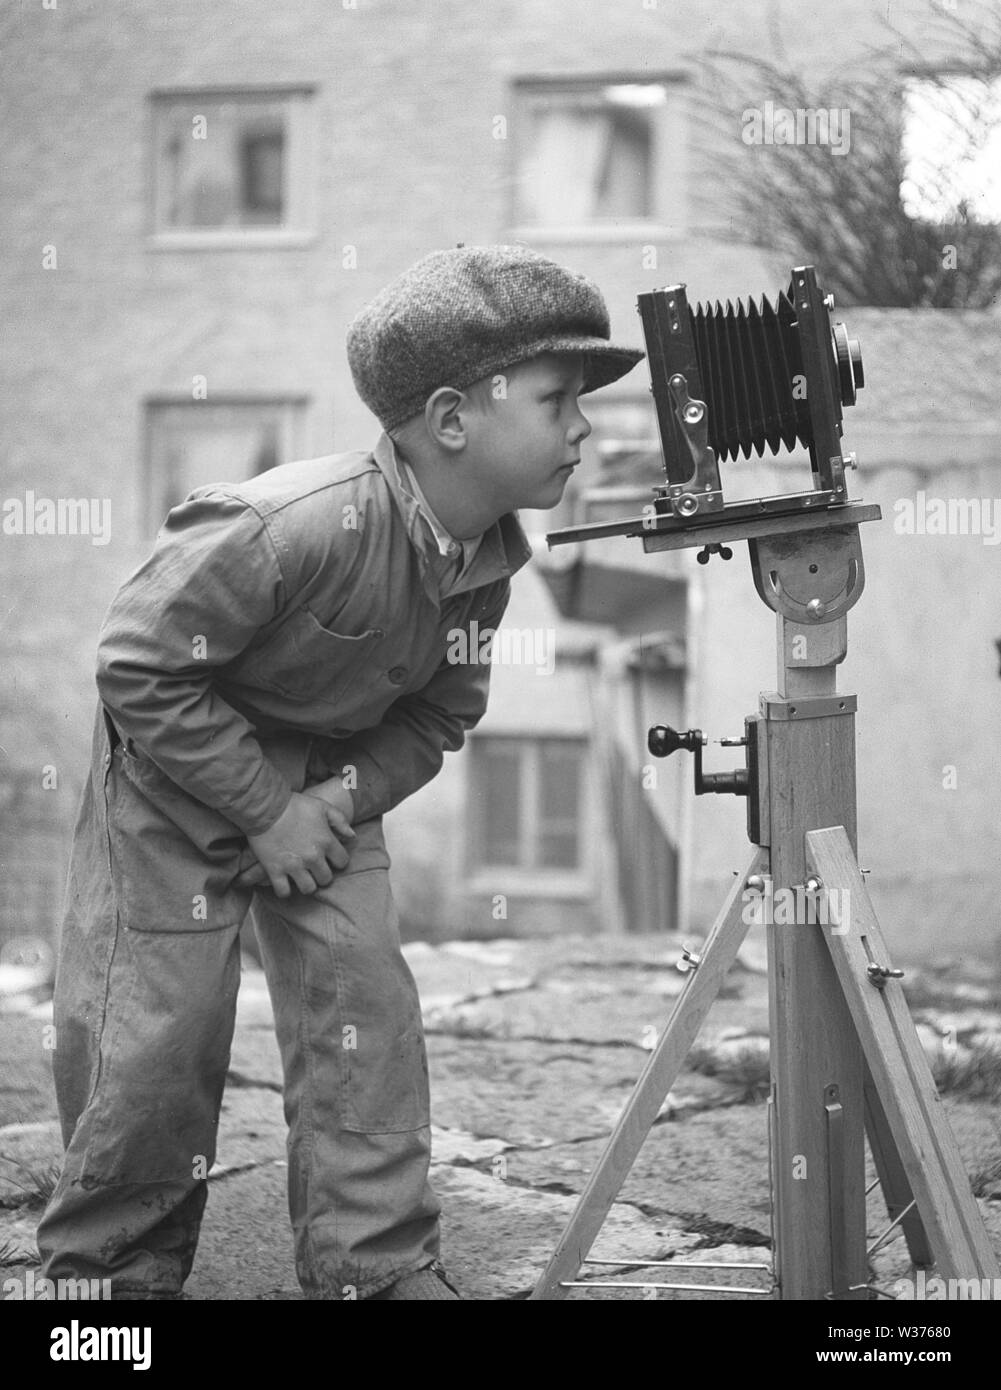 Boy in the 1940s. A curious child is looking into a camera mounted on a tripod.   Sweden 1945. Kristoffersson Ref N107-5 Stock Photo